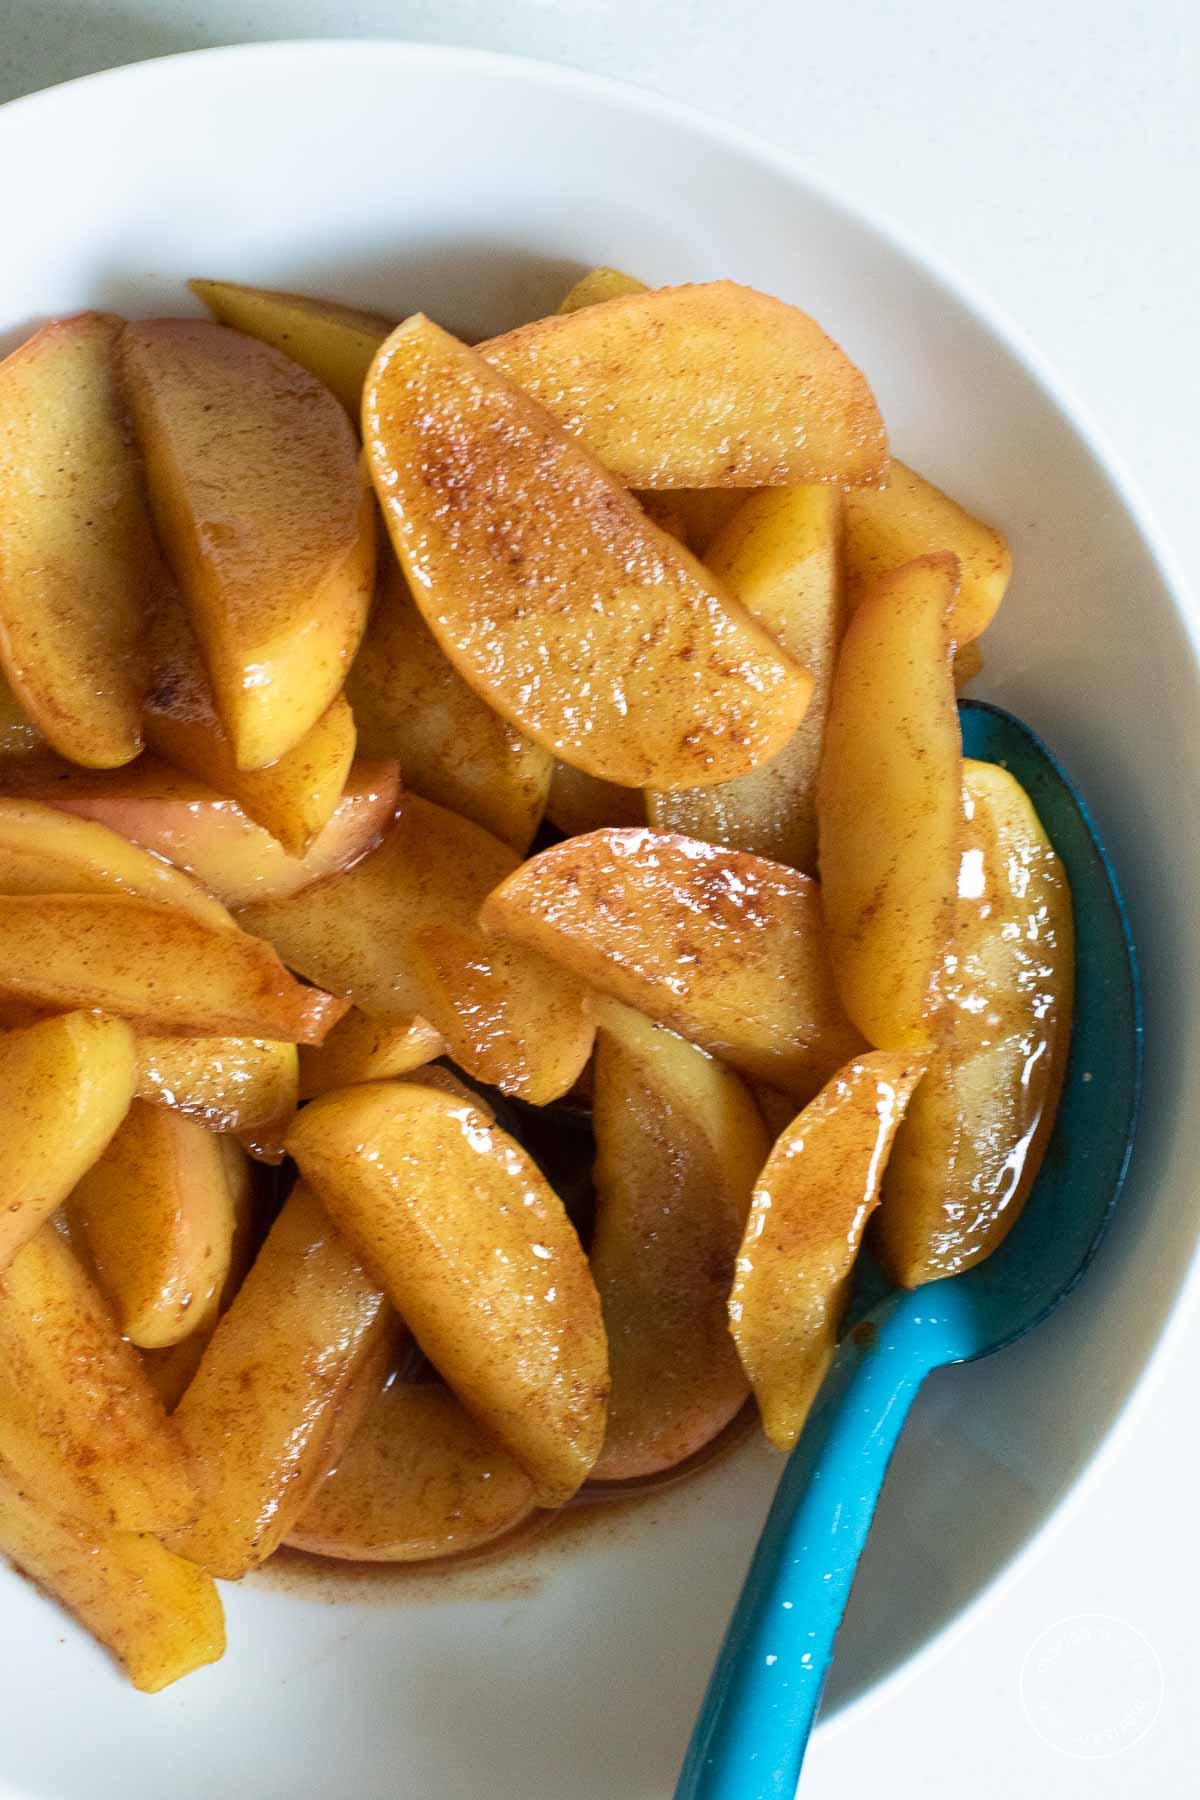 Cinnamon apples in a white bowl with a blue spoon